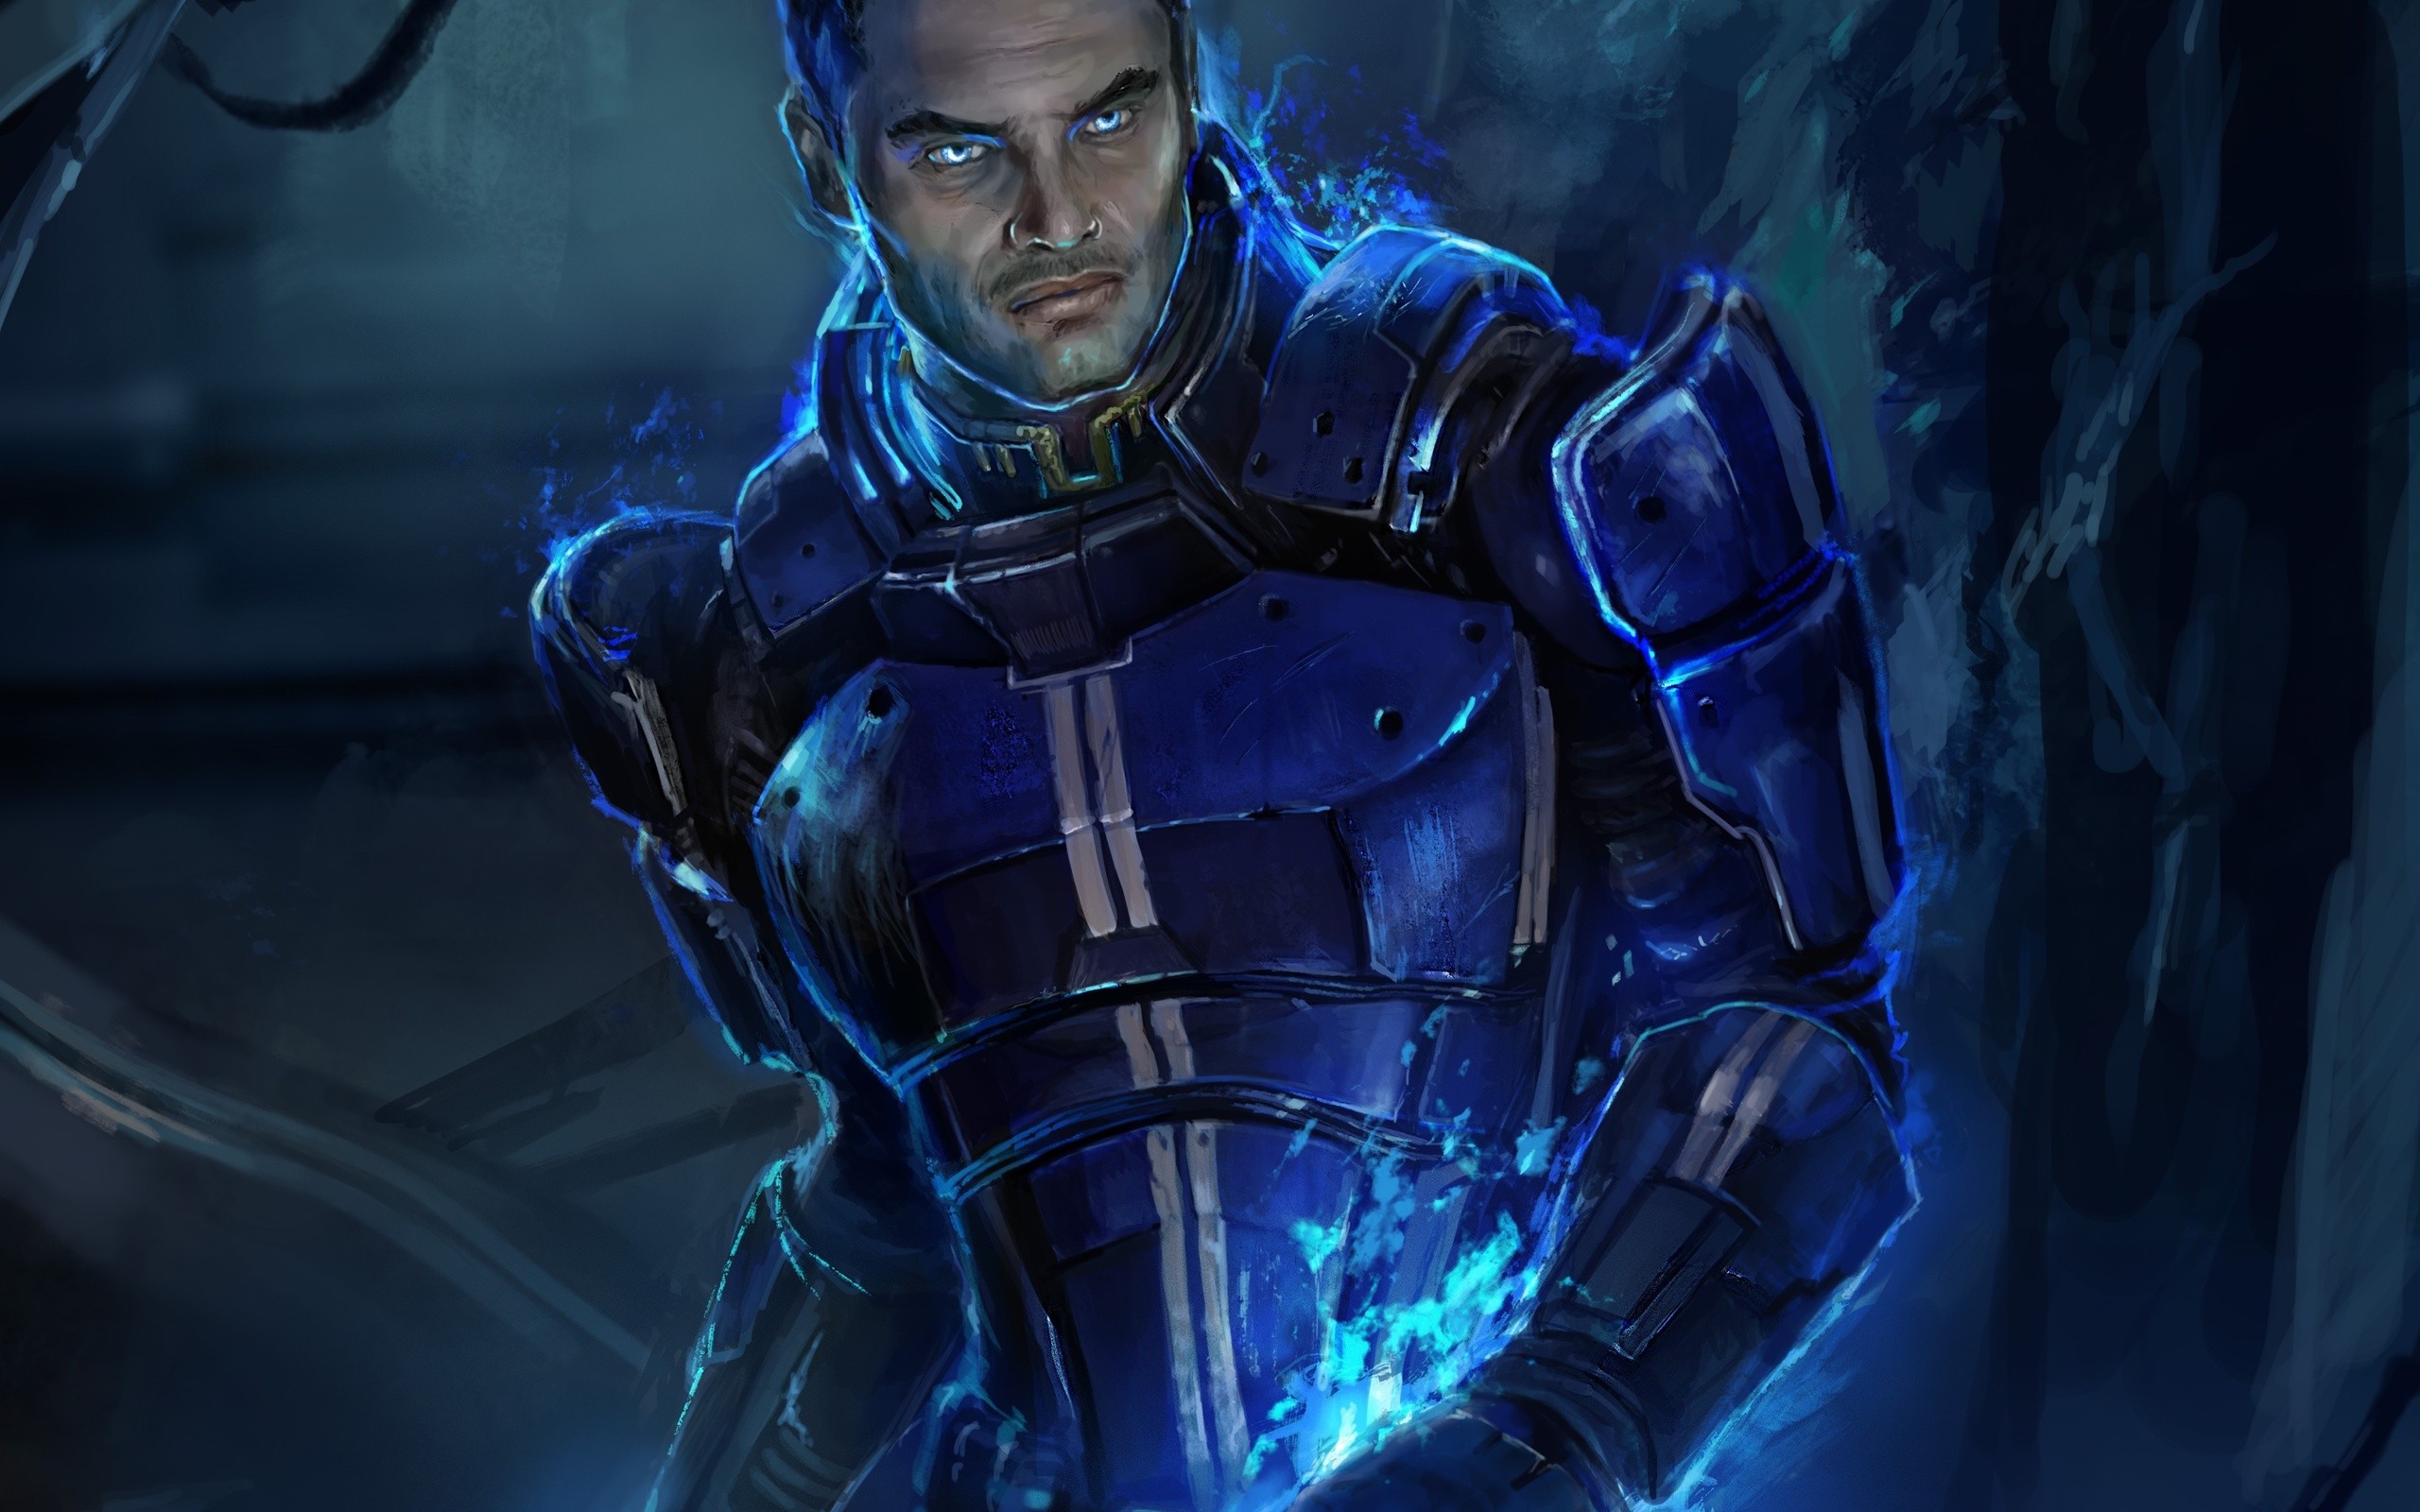 mass effect 2 download free where can i download from